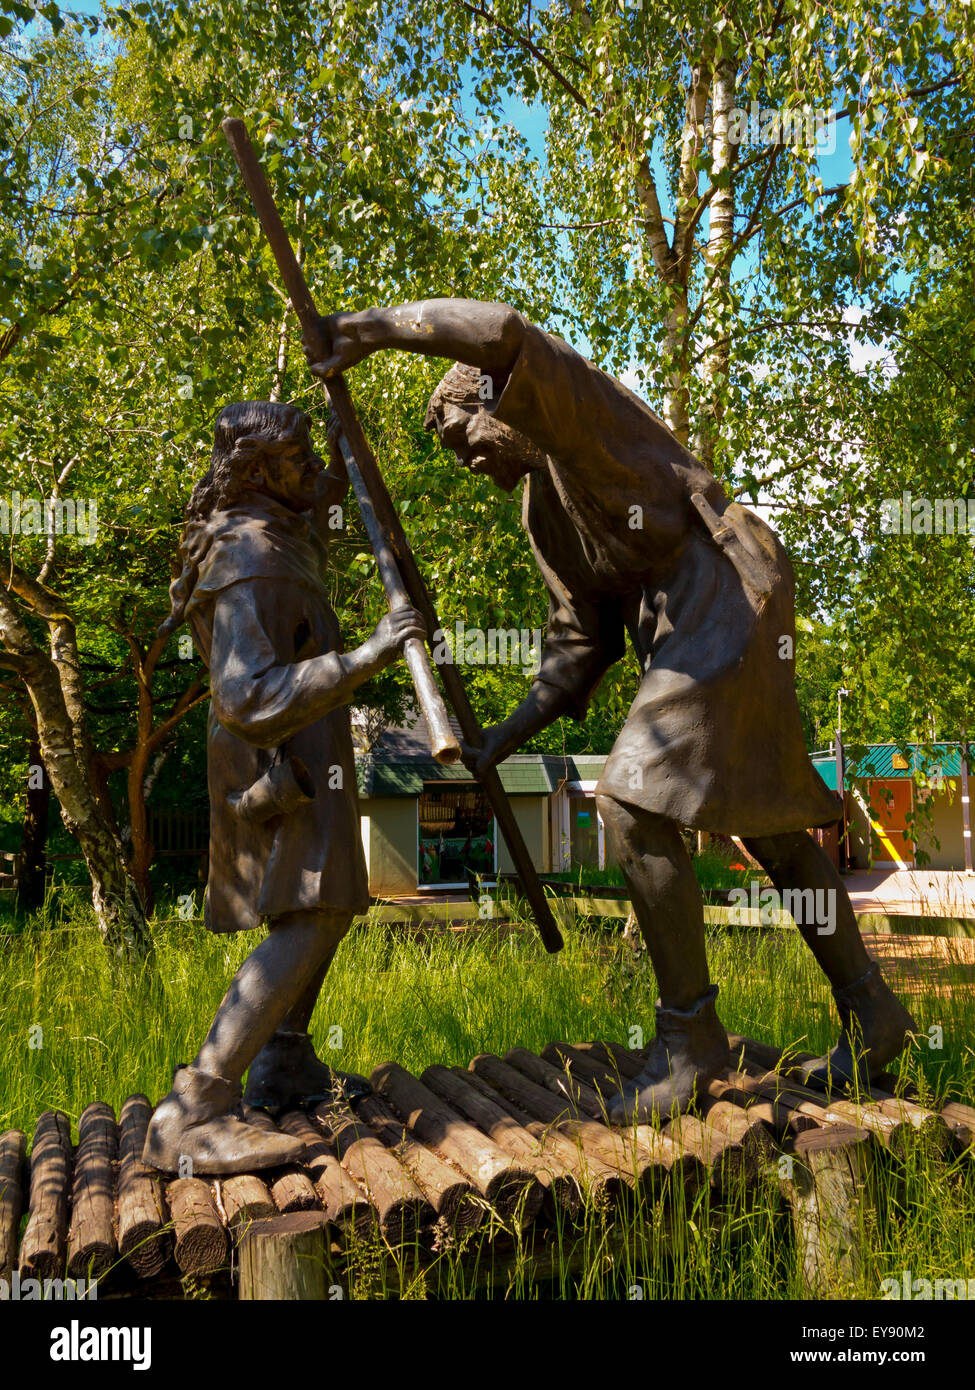 Sculpture of Robin Hood and Little John fighting at Sherwood Forest Visitor Centre Edwinstowe Nottinghamshire England UK Stock Photo